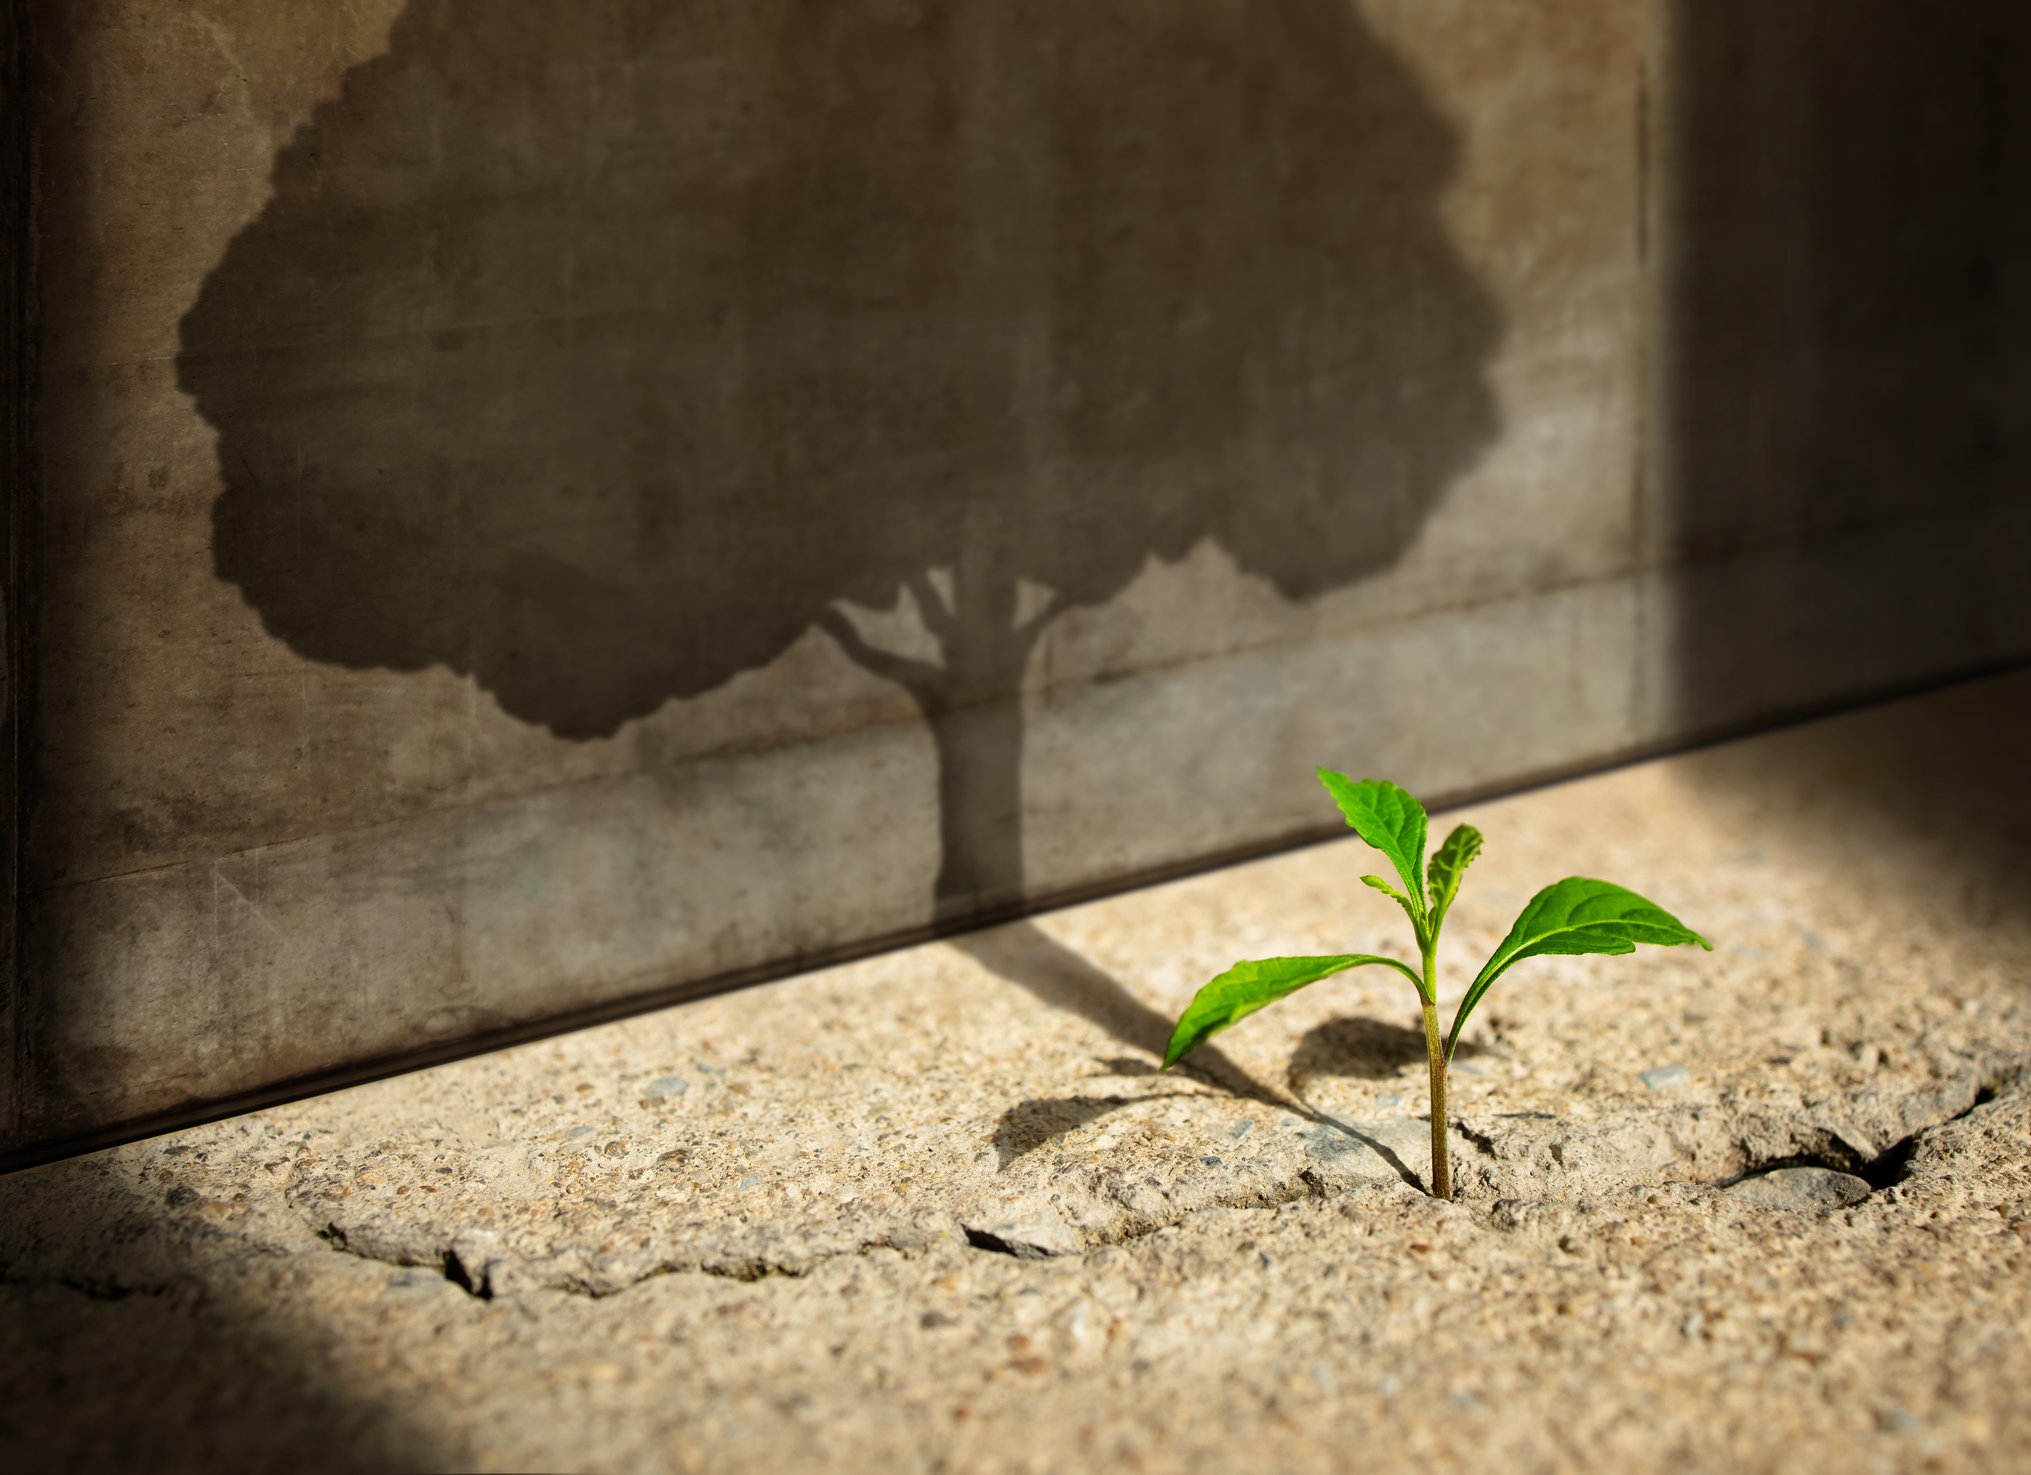 A small plant growing in a crack in the ground with a shadow of a tree behind it